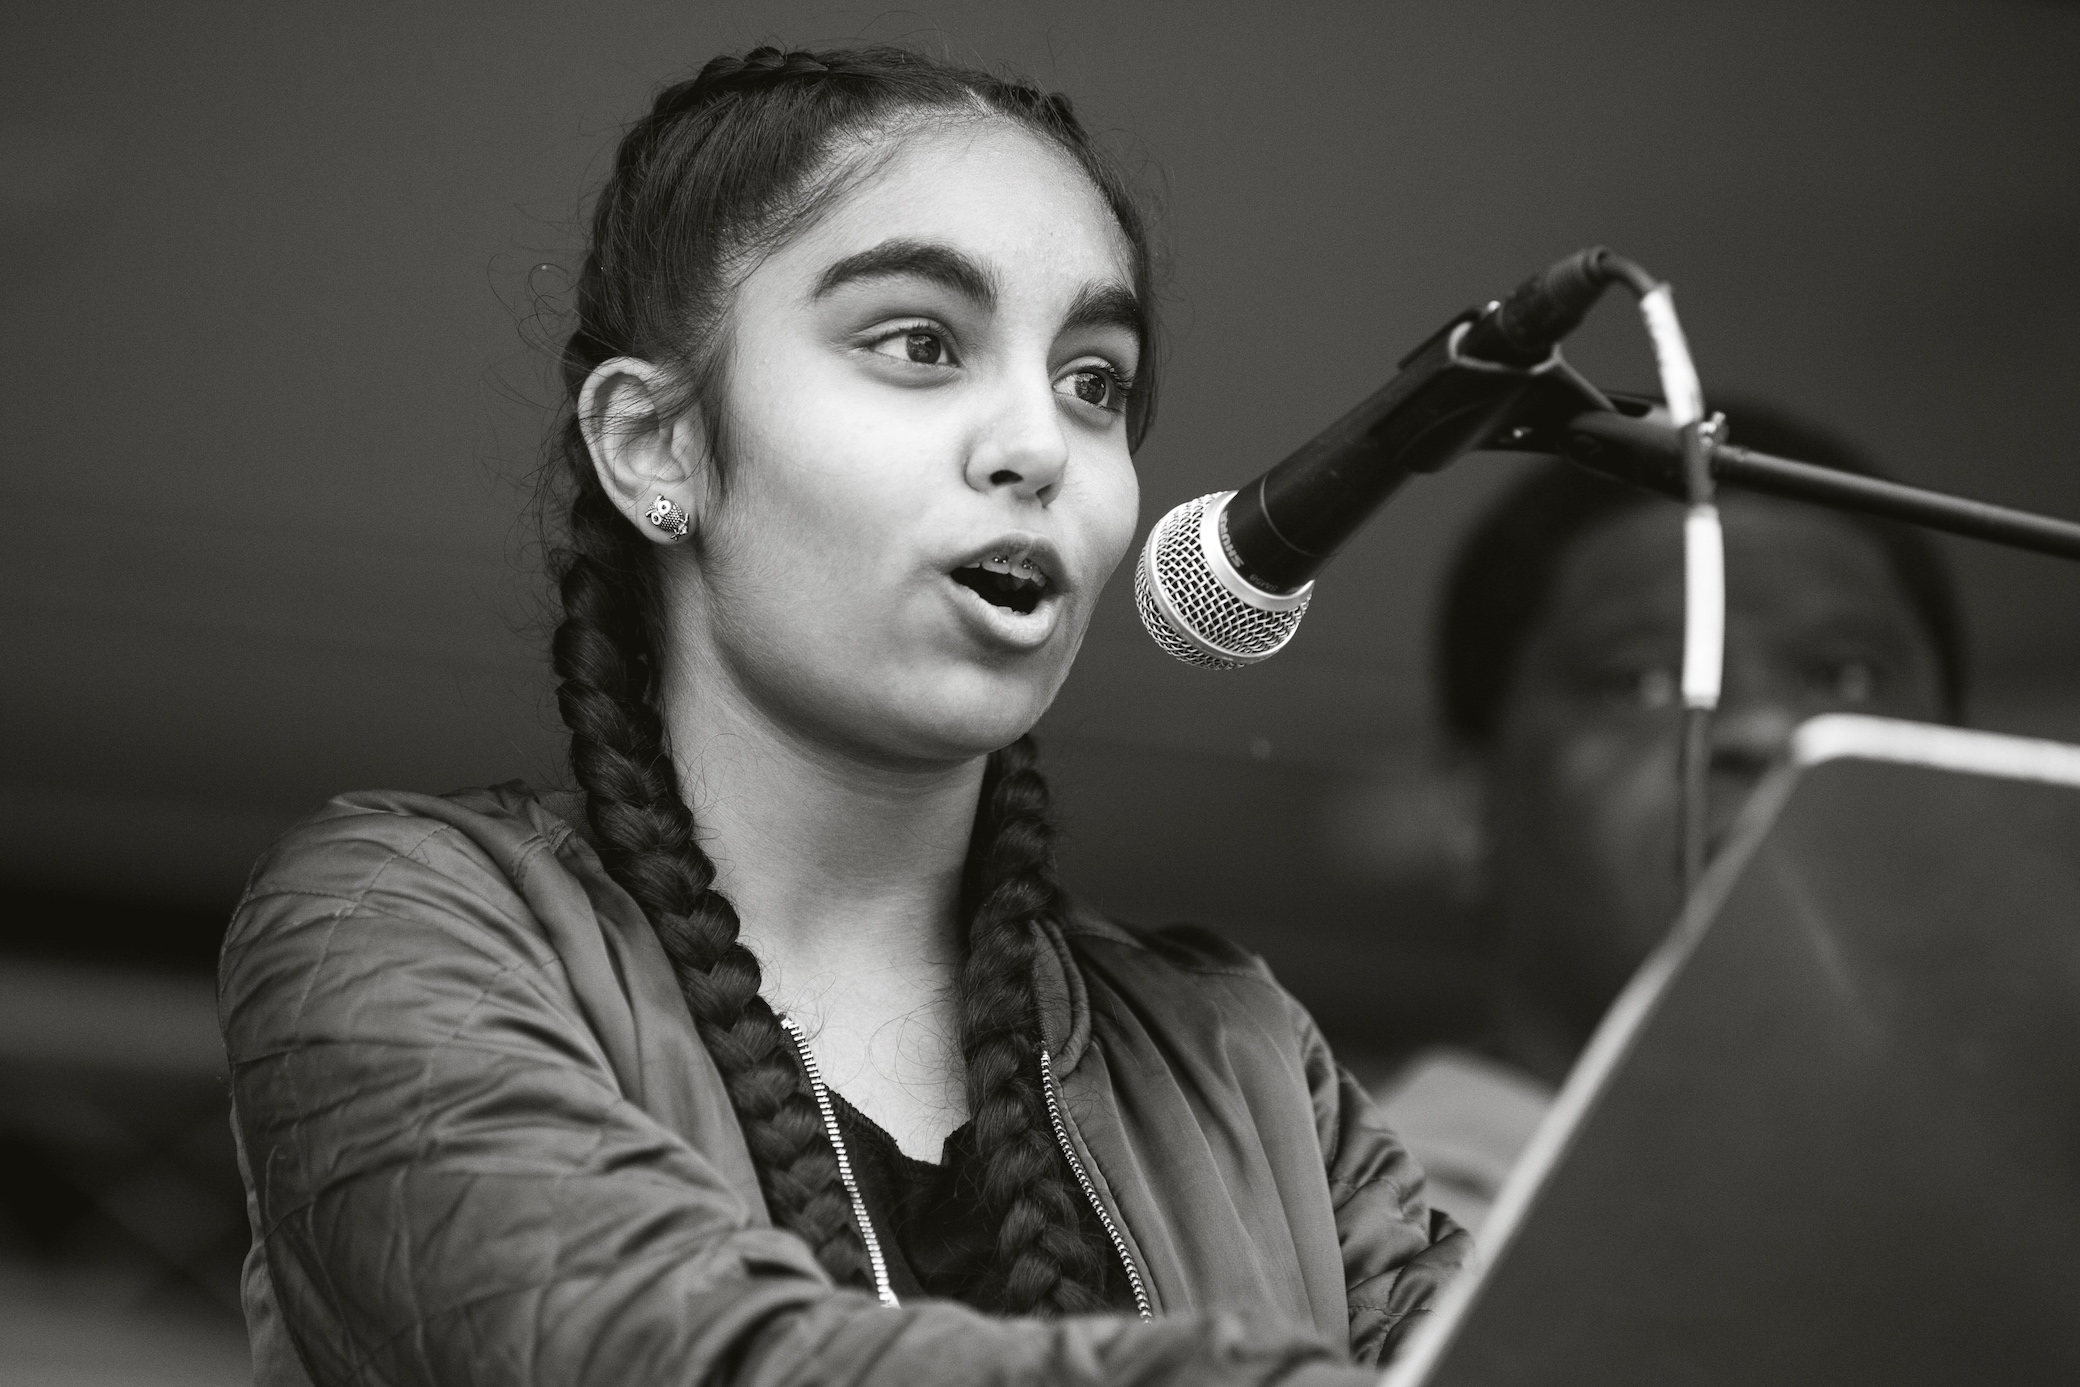 A young person speaking into a microphone at a lectern